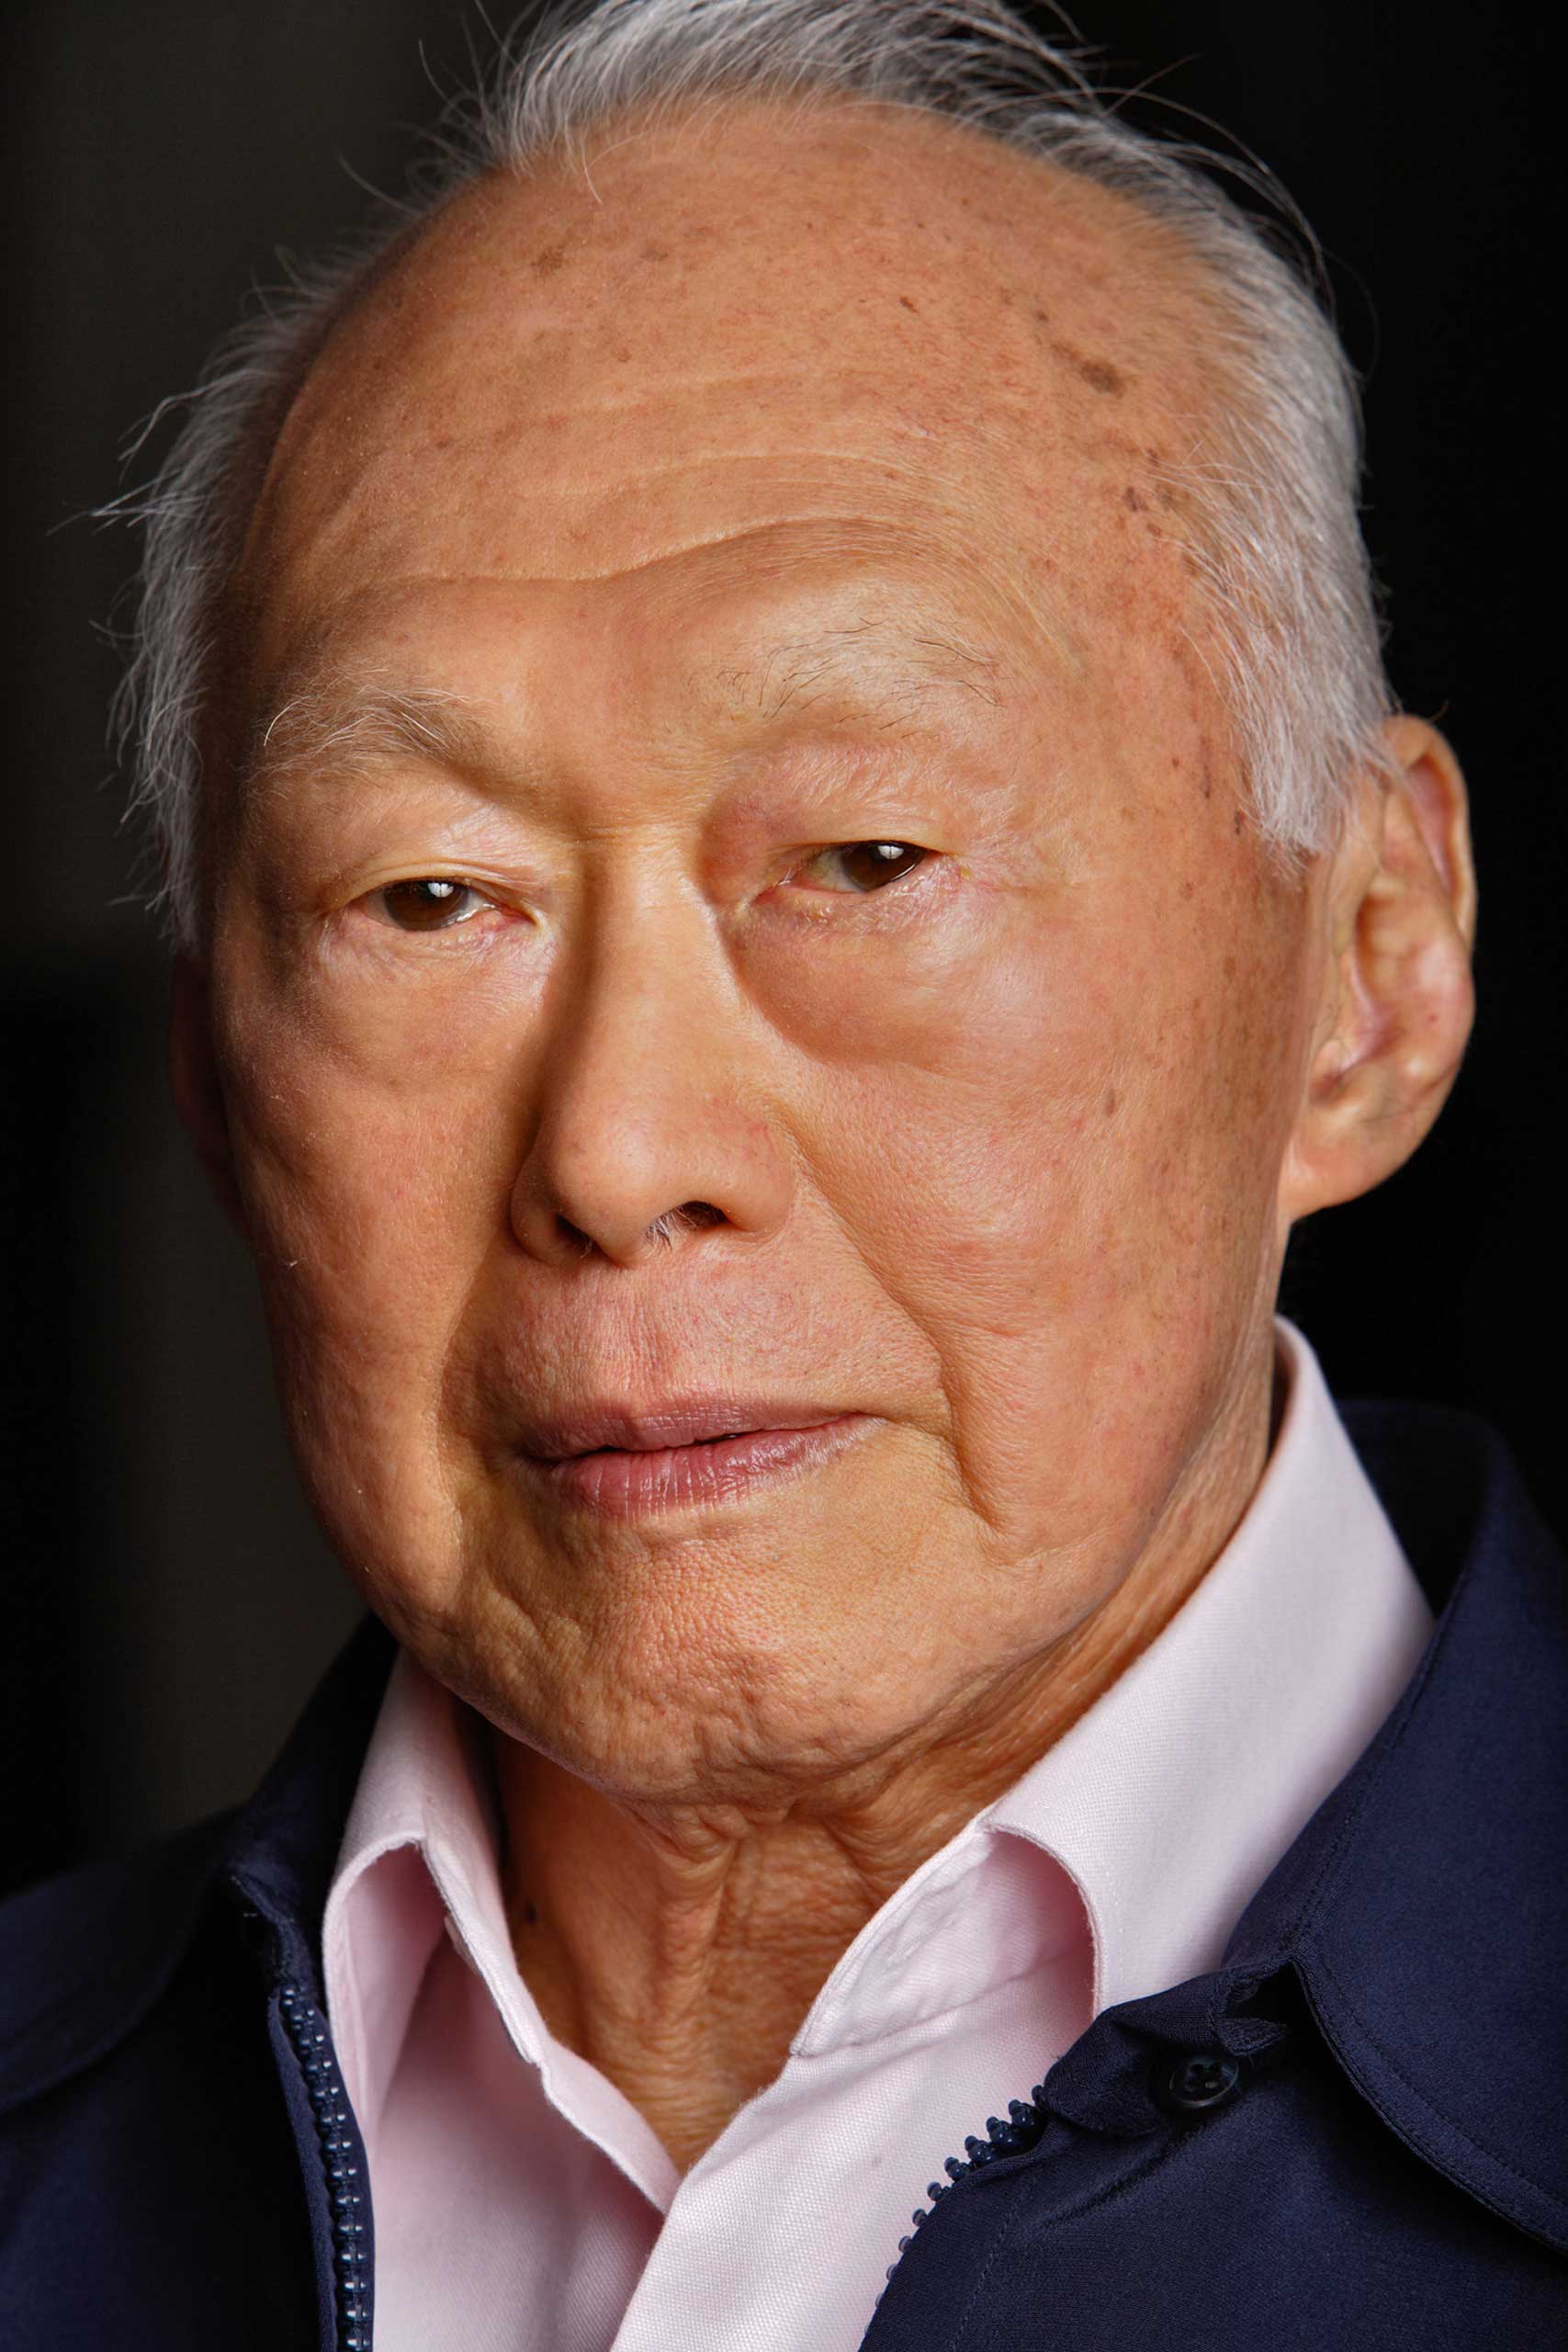 Singapore's Minister Mentor Lee Kuan Yew poses for a portrait before an interview with Bloomberg in Singapore on Friday, September 2, 2005.    Photographer: Jonathan Drake/Bloomberg News